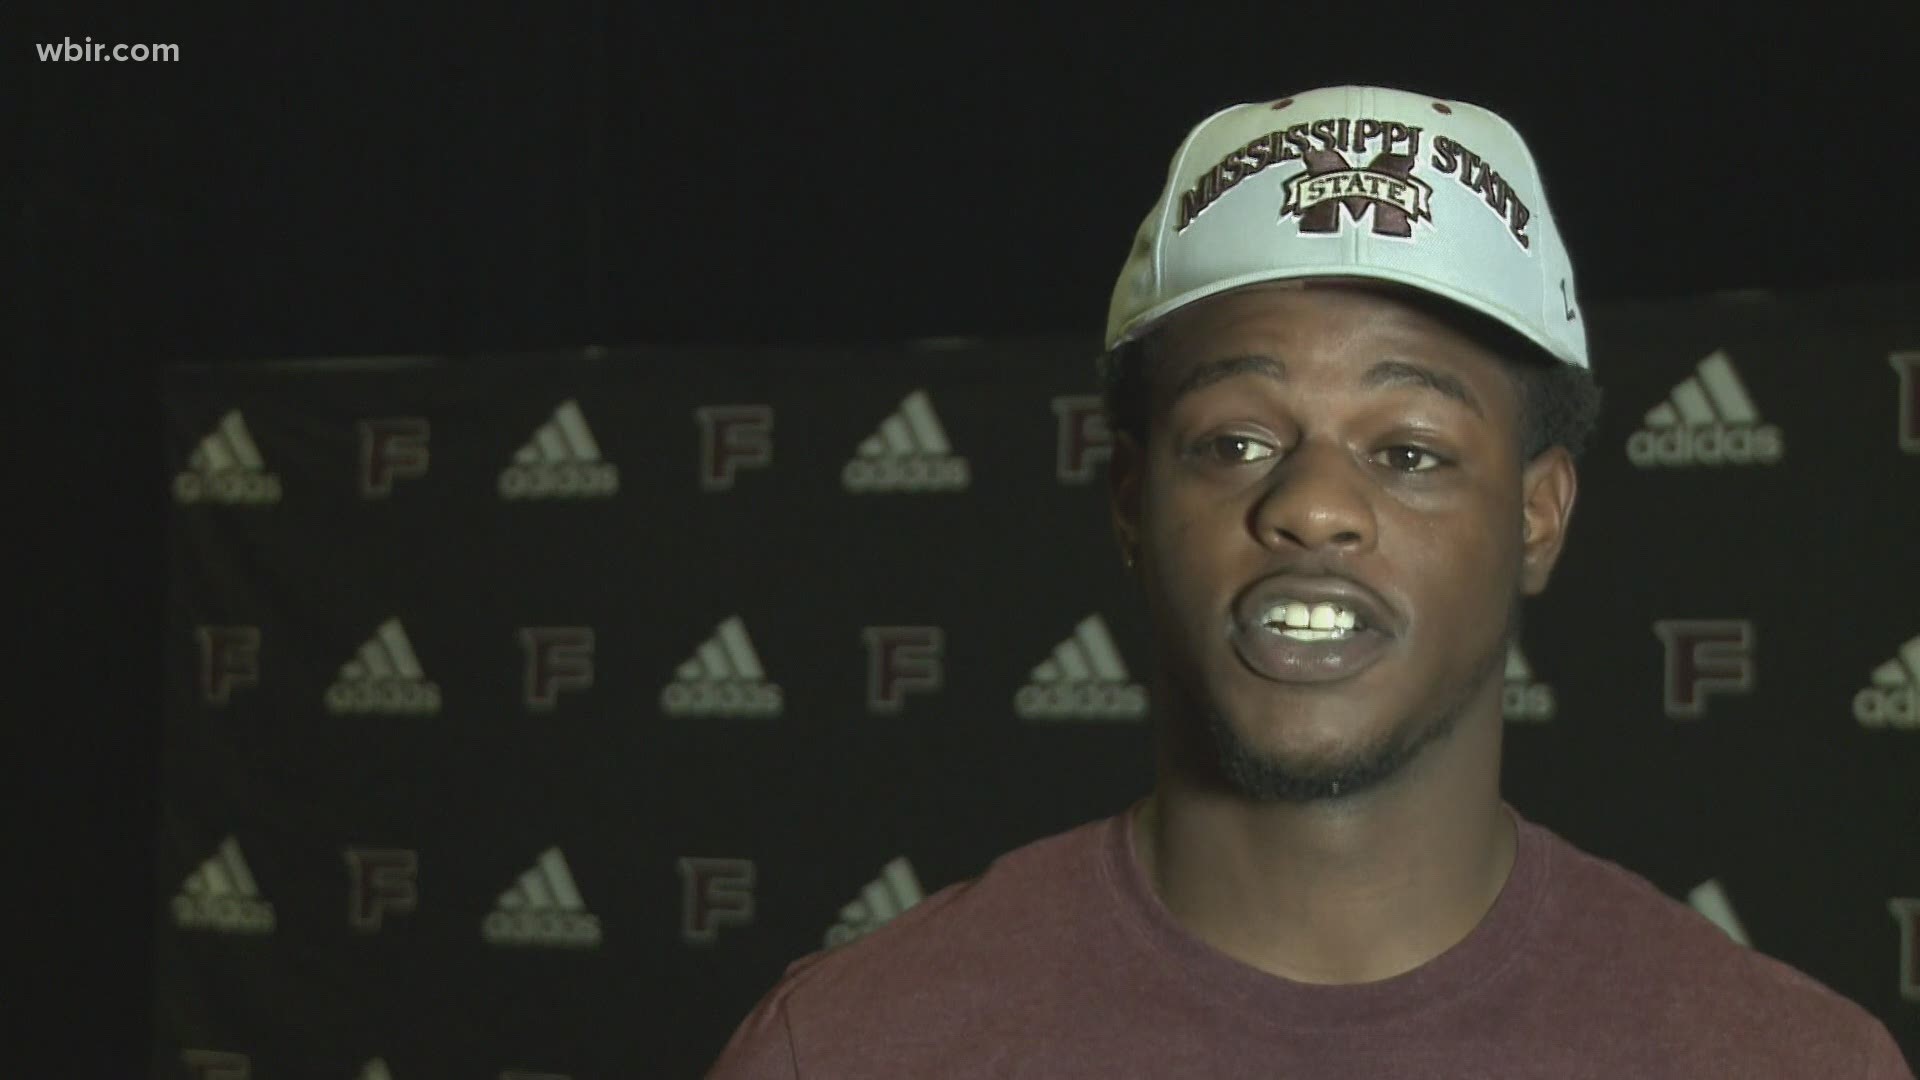 Former Fulton star signs with Mississippi State